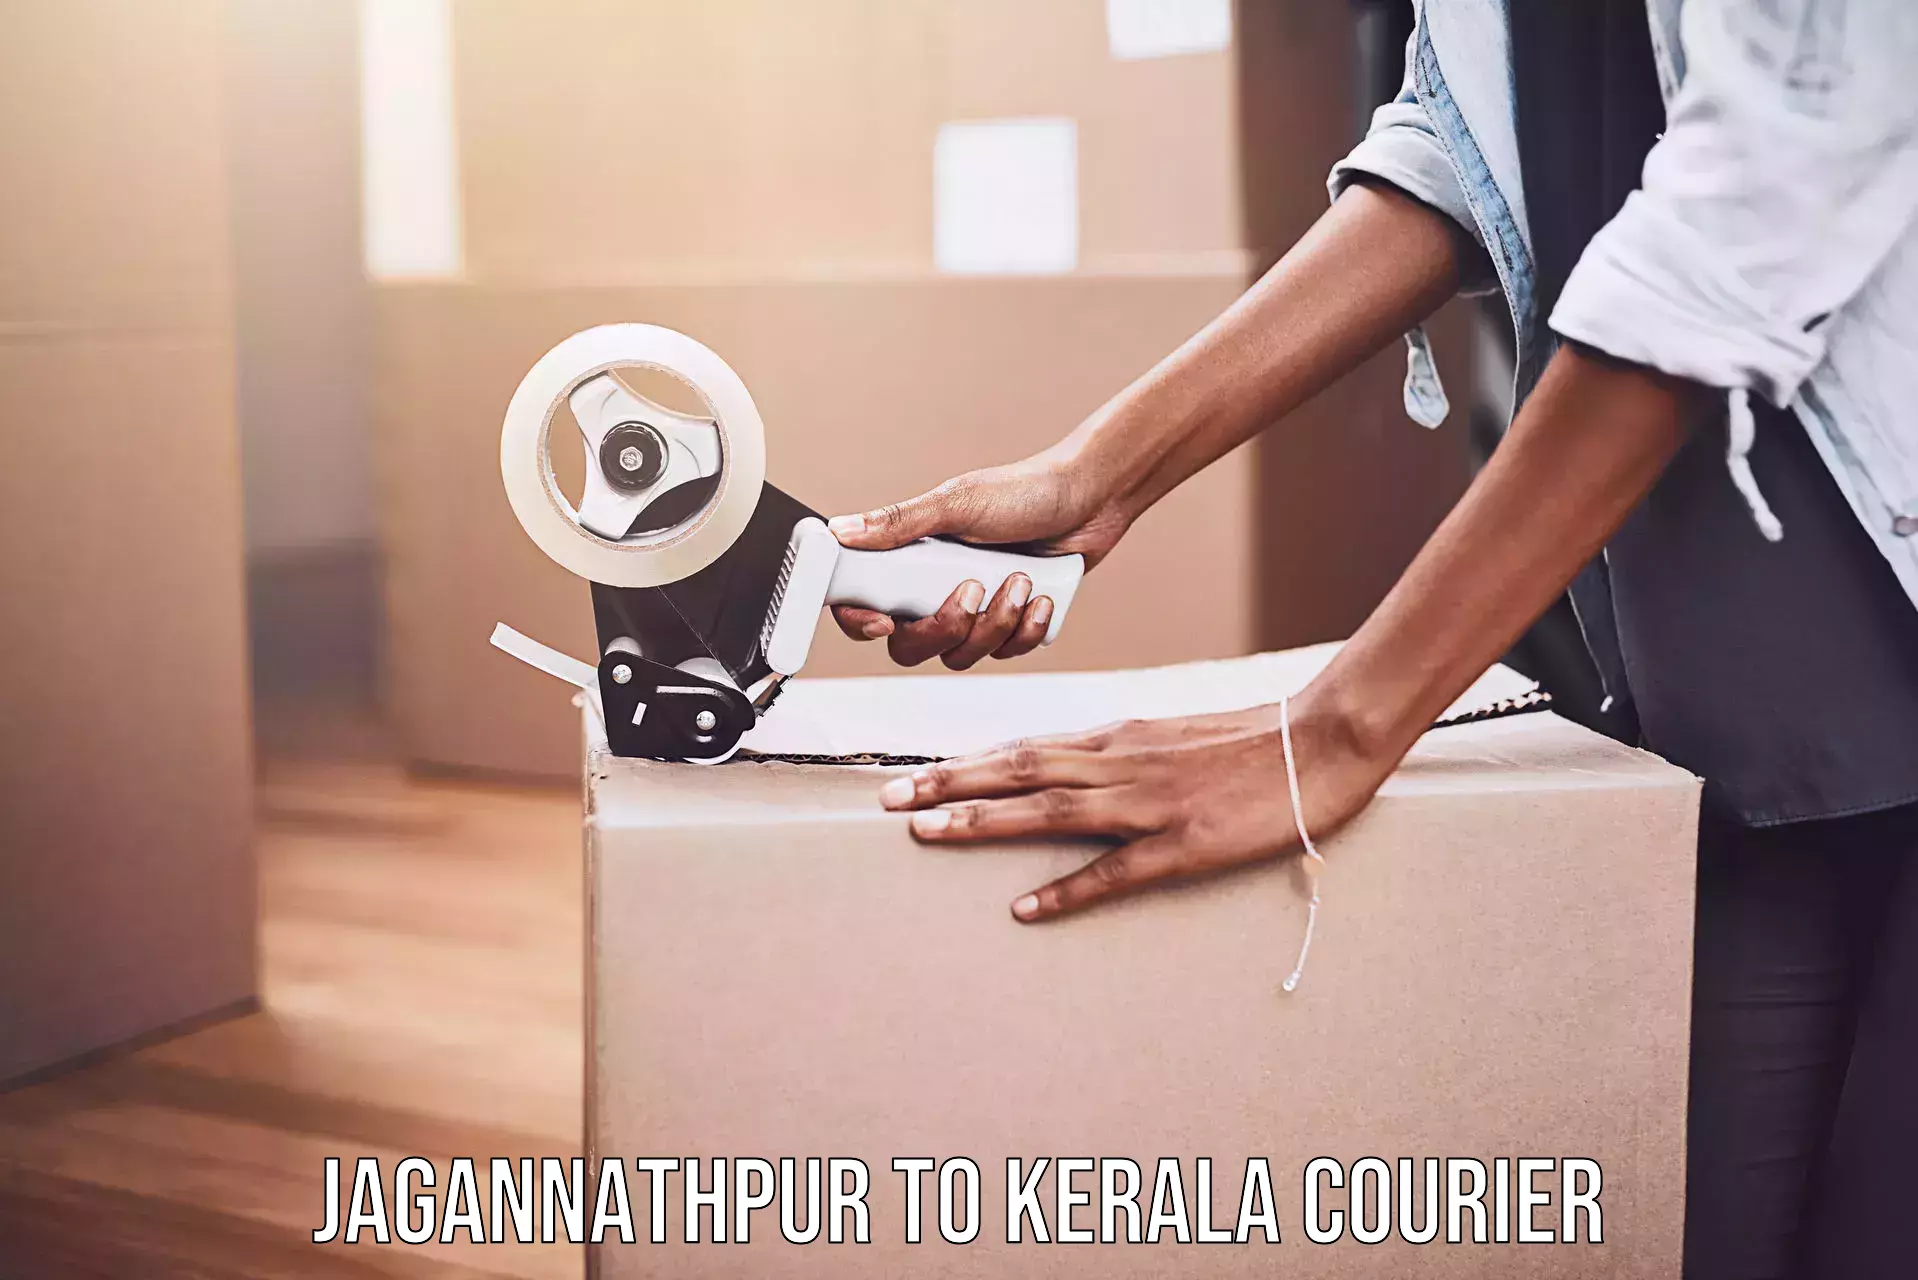 Quick dispatch service Jagannathpur to Cochin University of Science and Technology